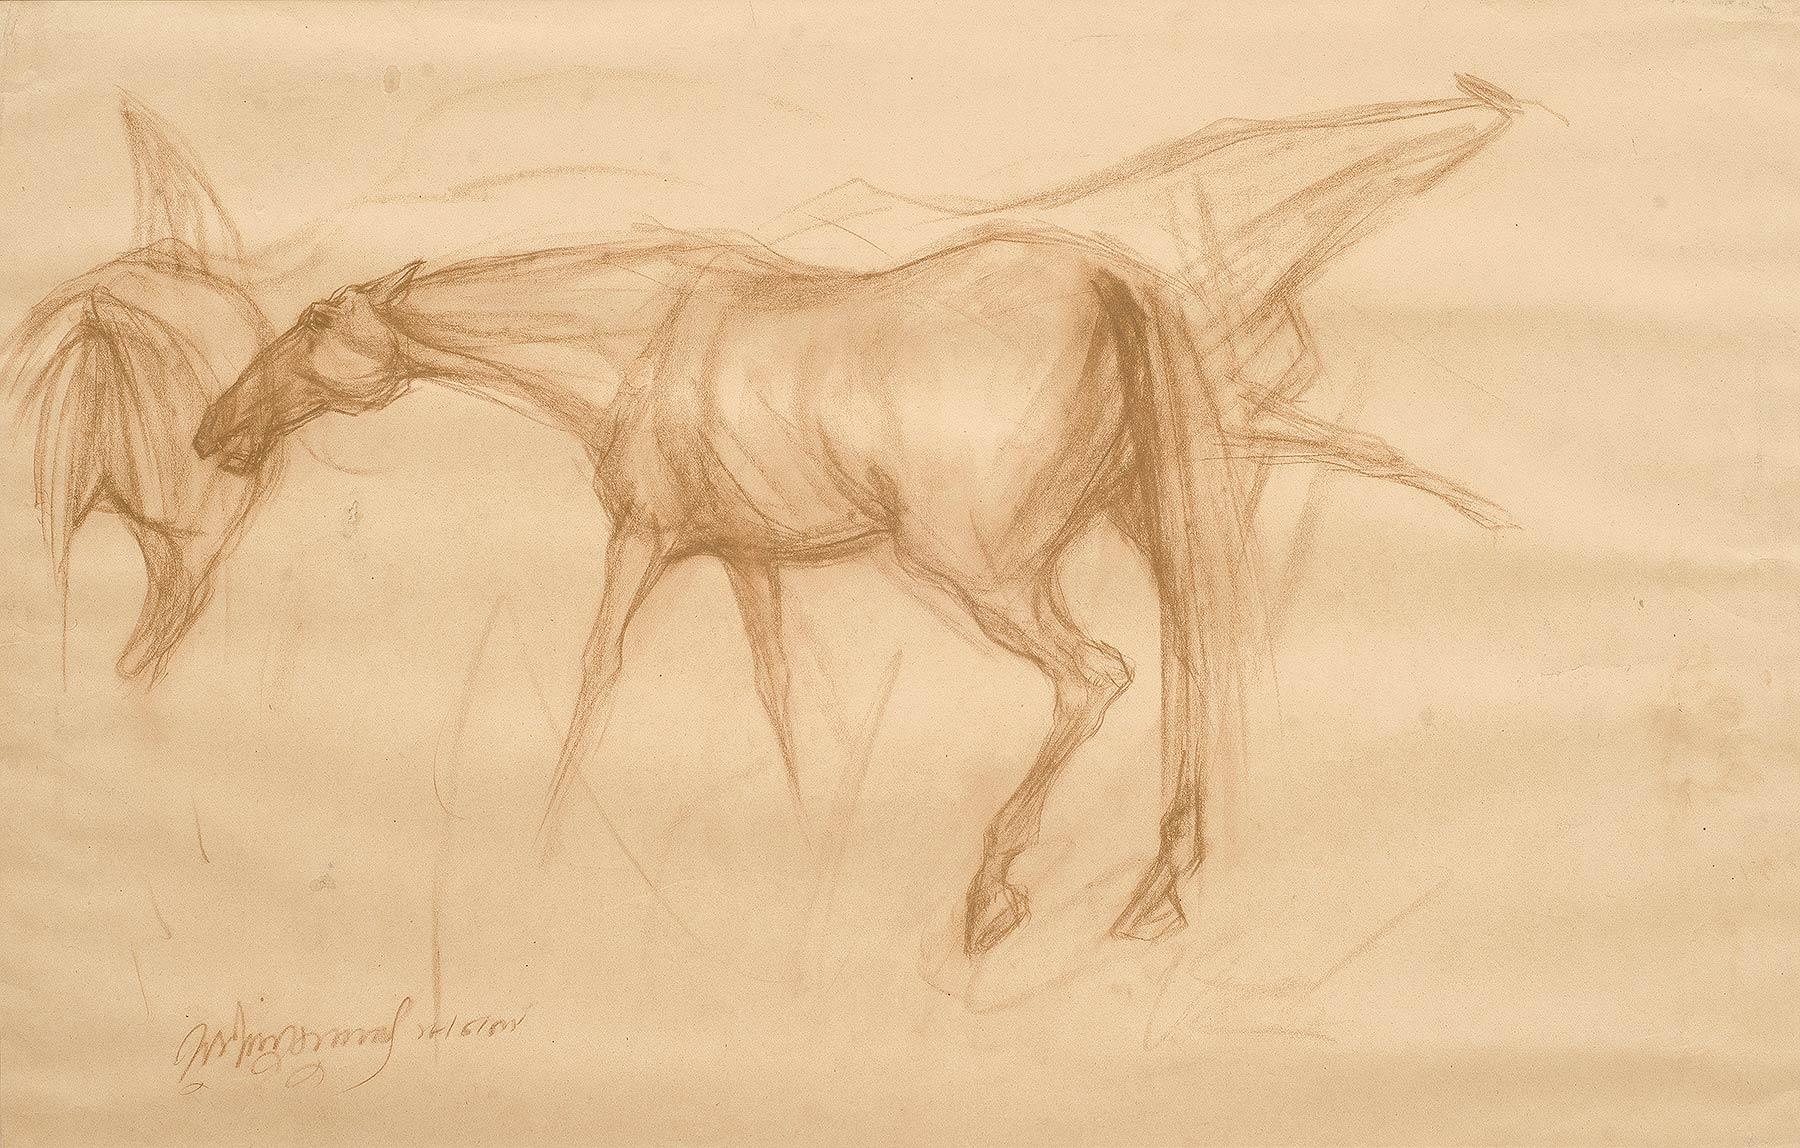 Sunil Das Animal Painting - Early Horses II, Drawing, Conte on Paper, Brown by Modern IndianArtist"In Stock"